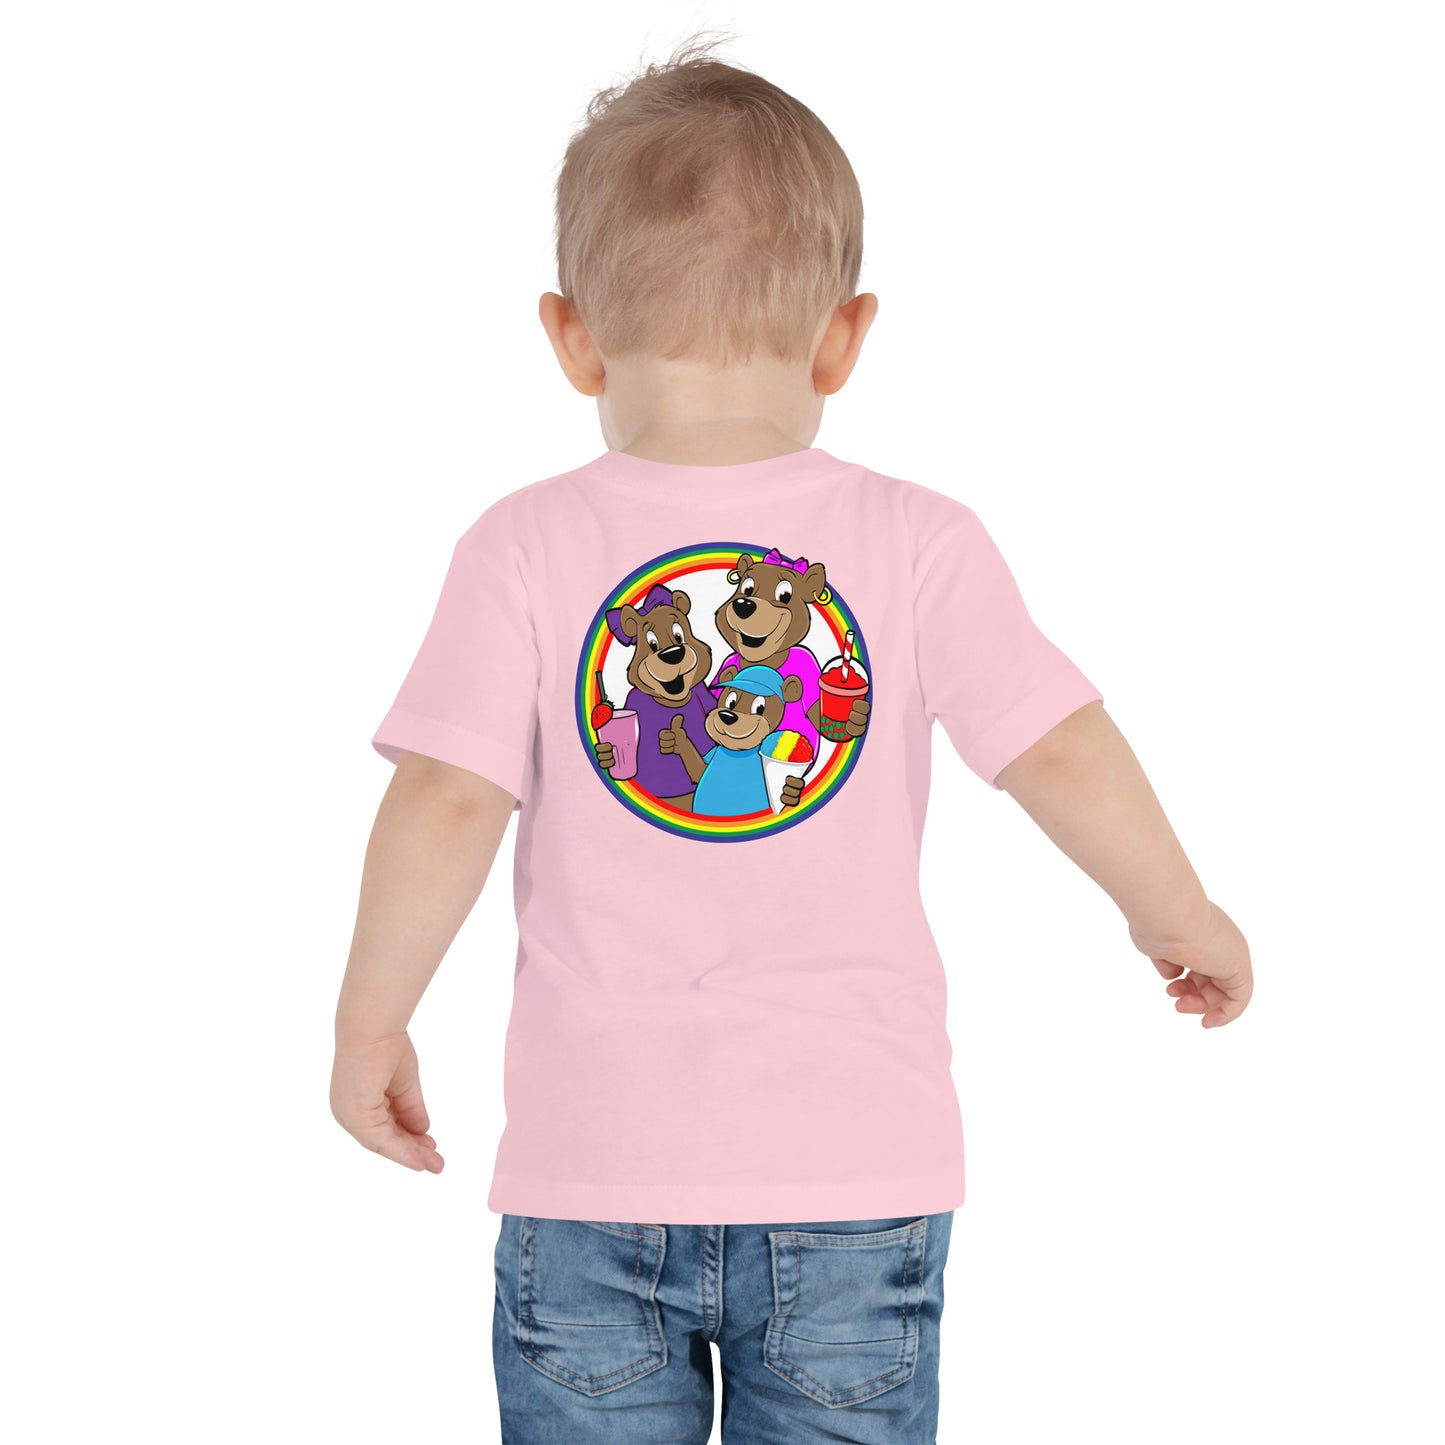 "It's A Boba Tea Kind Of Day" BesTEAS Toddler Tee